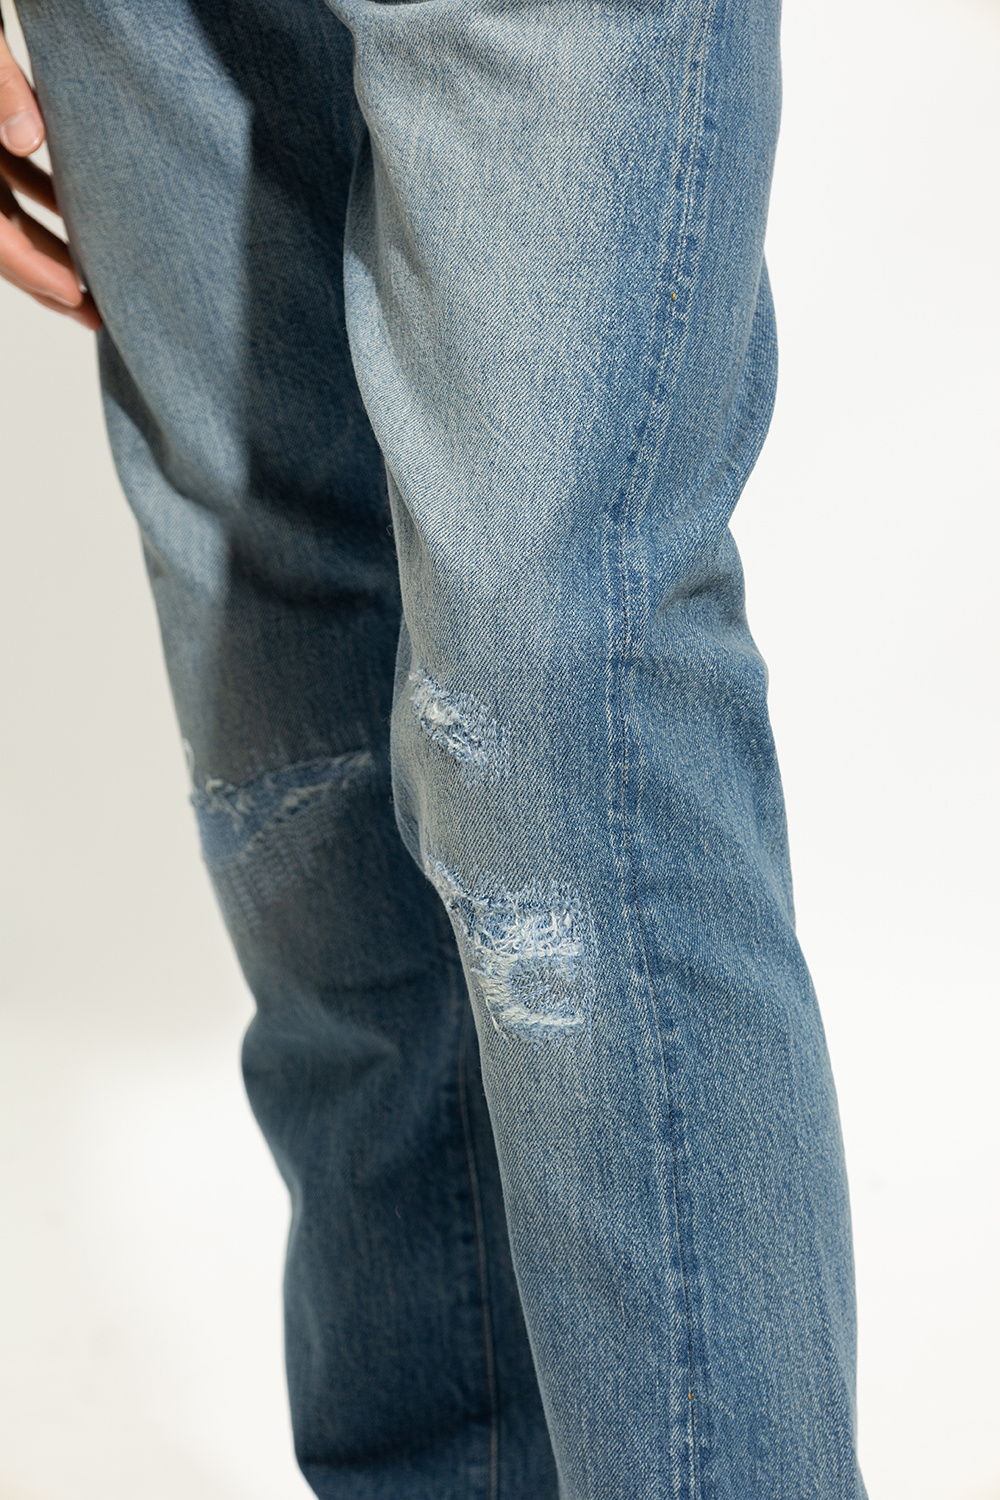 Levi's The ‘Vintage Clothing’ collection jeans